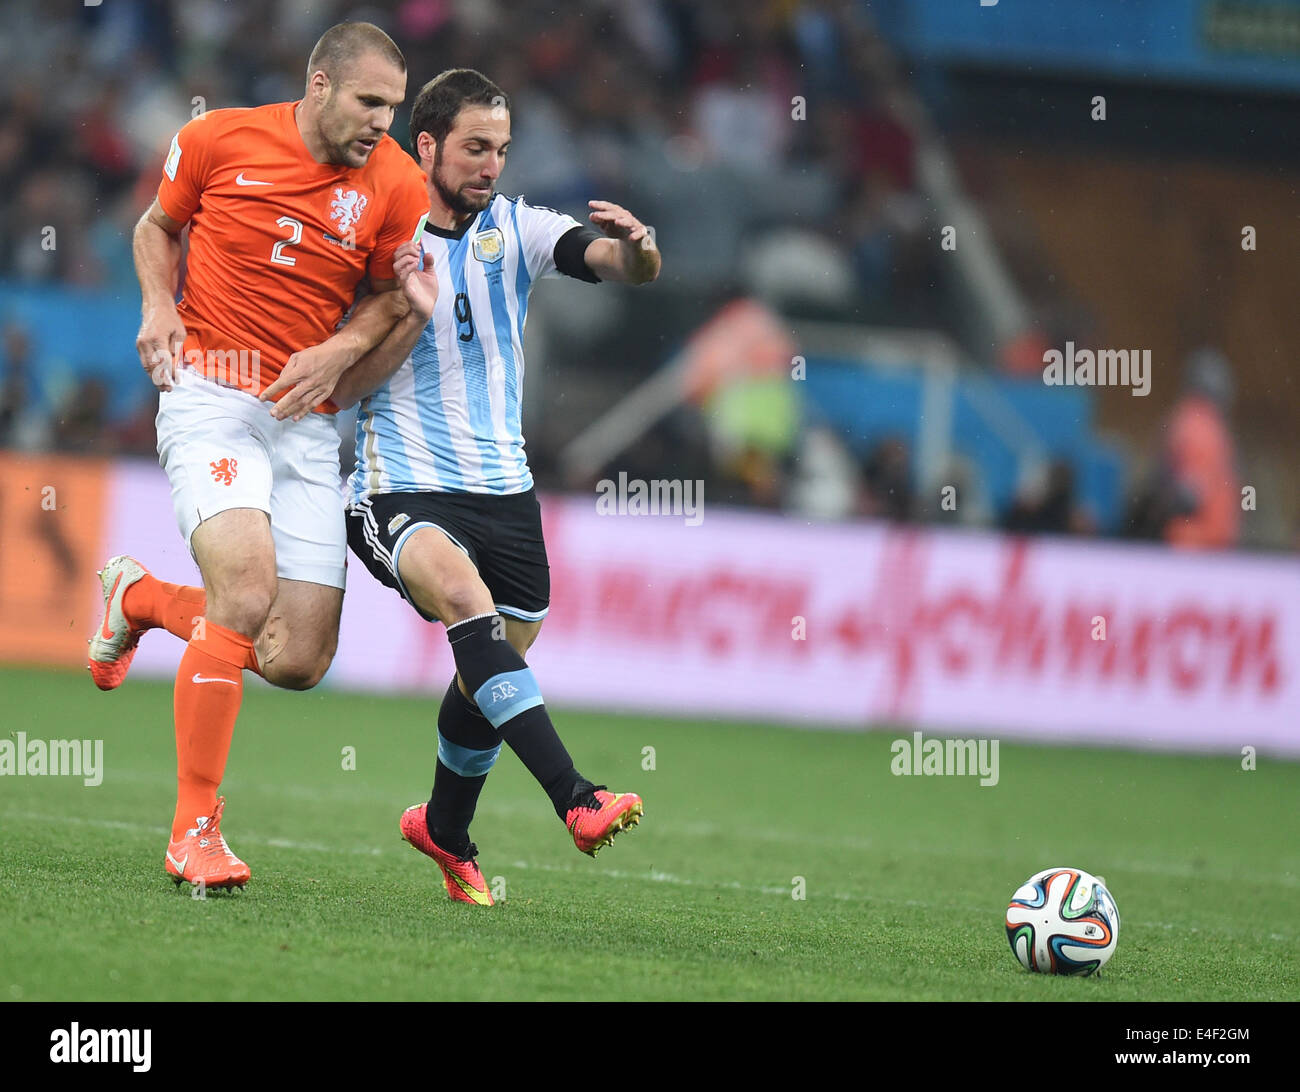 Sao Paulo, Brazil. 09th July, 2014. Gonzalo Higuain (R) of Argentina and Ron Vlaar of the Netherlands vie for the ball during the FIFA World Cup 2014 semi-final soccer match between the Netherlands and Argentina at the Arena Corinthians in Sao Paulo, Brazil, 09 July 2014. Photo: Marius Becker/dpa/Alamy Live News Stock Photo